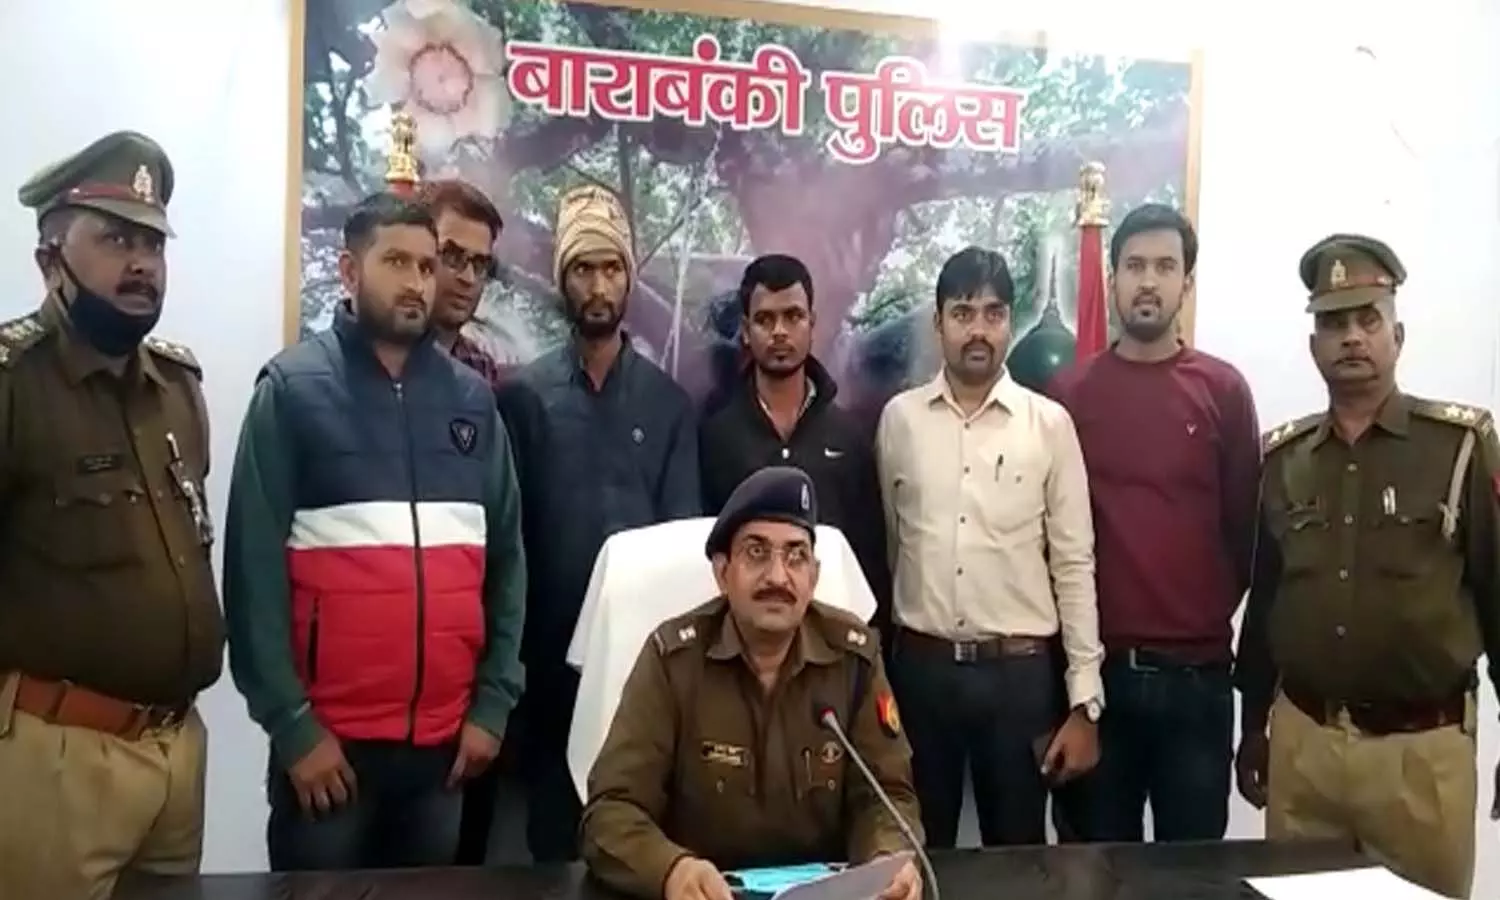 Barabanki Crime News: Police crackdown on cyber thugs, two gang members arrested, used to fraud people and send money abroad